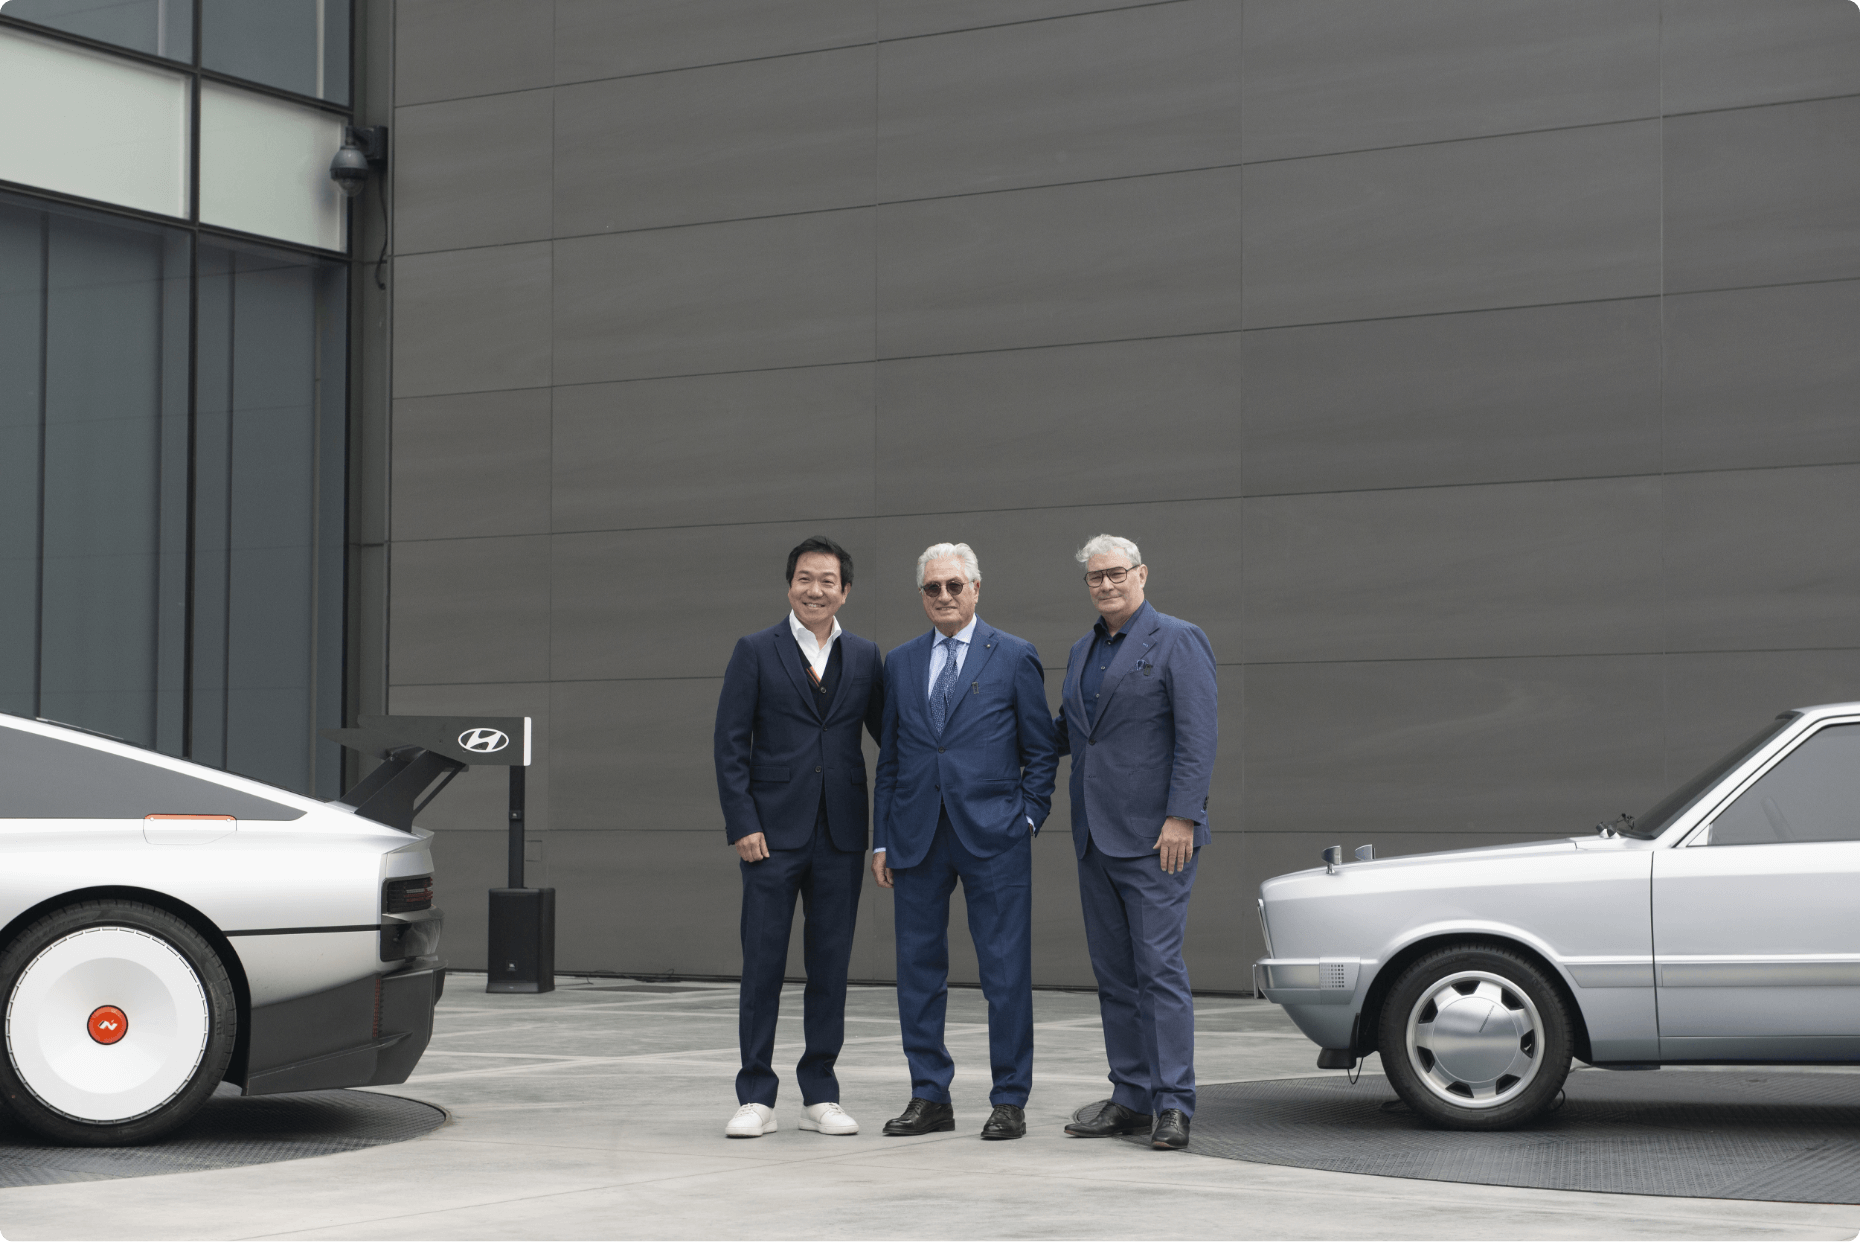 Giorgetto Giugiaro, Luc Donckerwolke, Chief Creative Officer of Hyundai Motor Group, and Sang-yup Lee, Executive Vice President and Head of Hyundai Motor's Global Design Center, standing together at the Hyundai Design Center